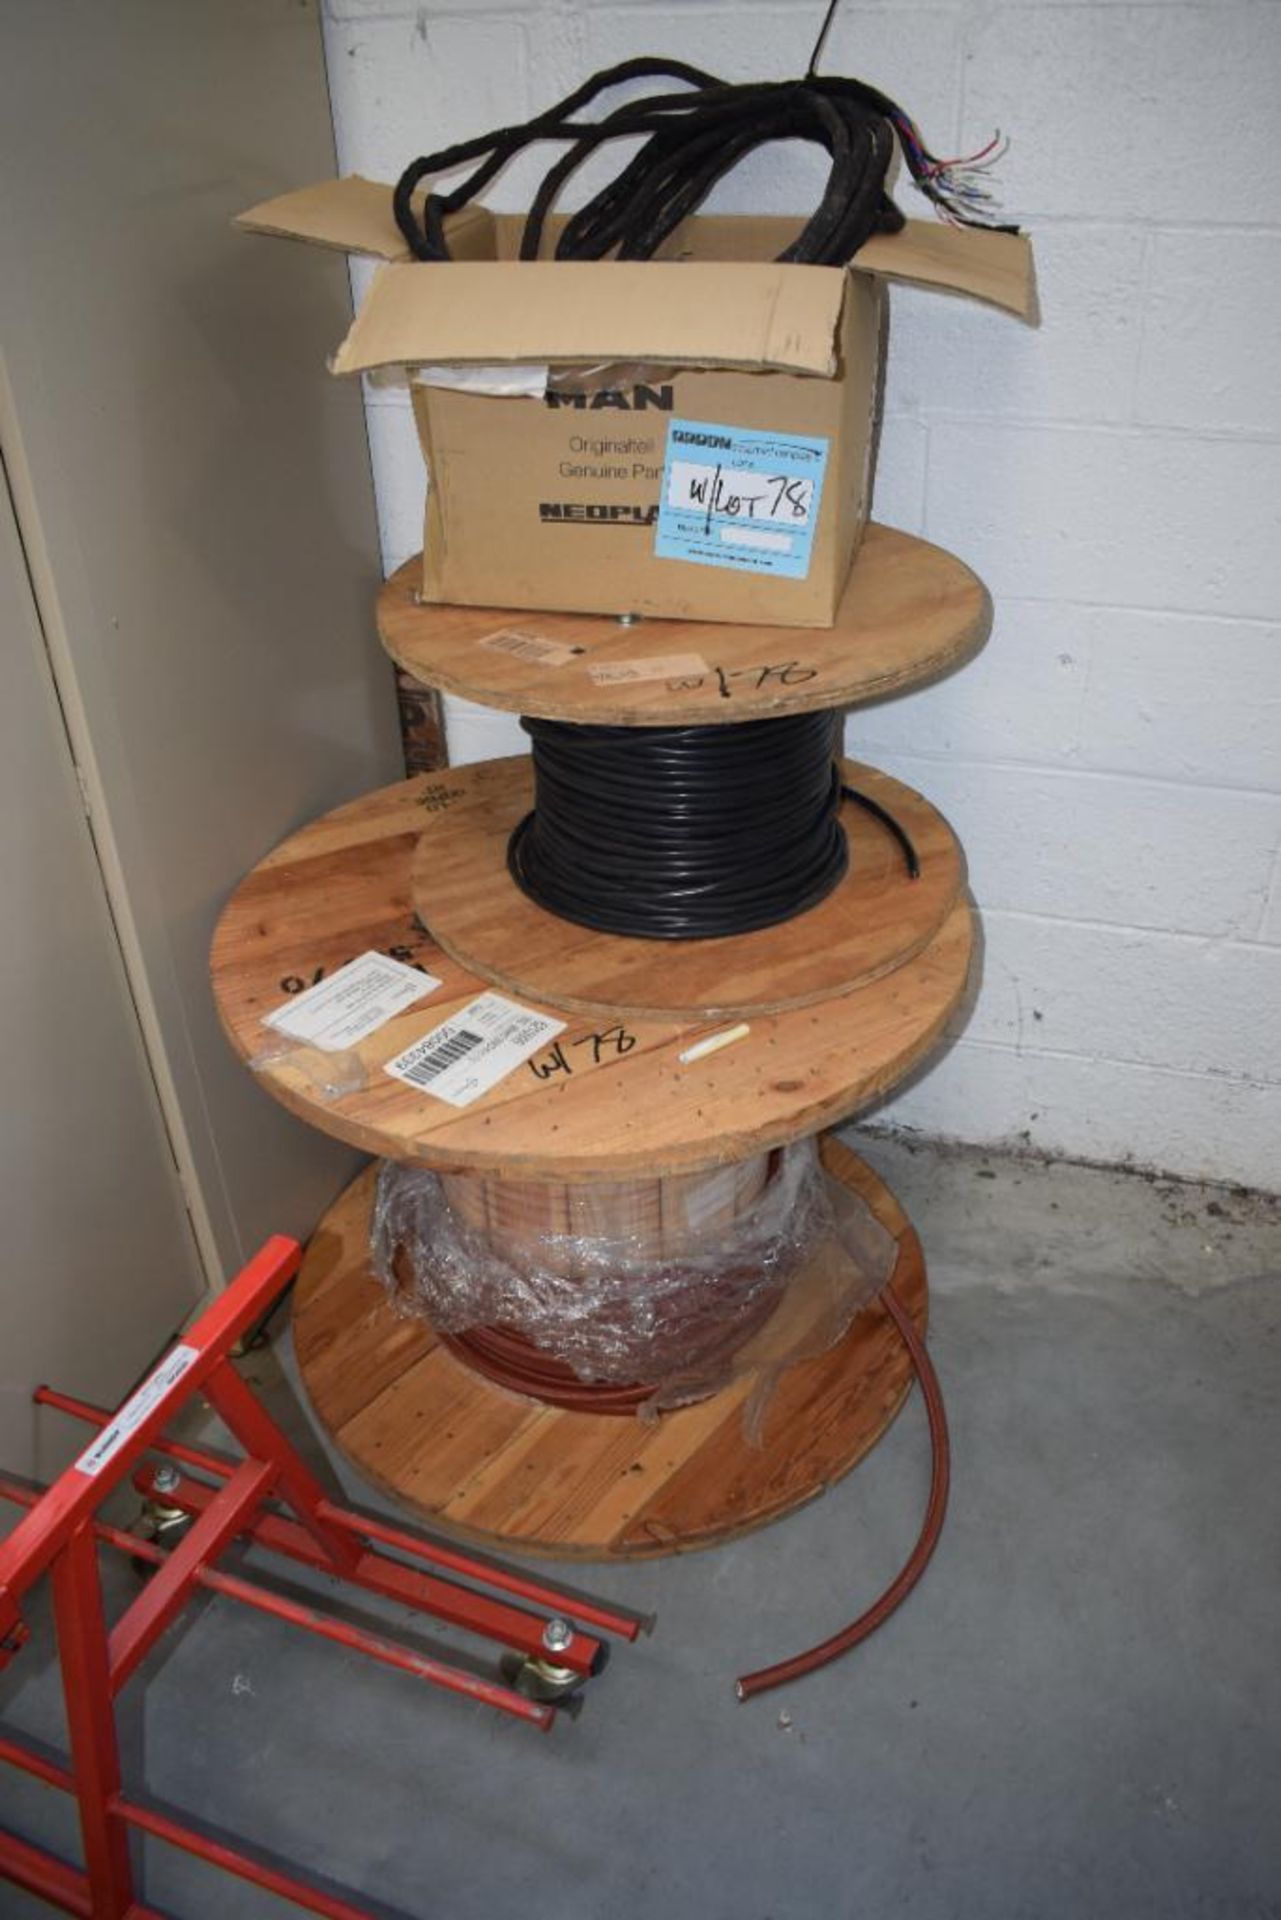 Lot Consisting Of: Miscellaneous Wire Spools, (1) 2 door metal cabinet, (2) wire spool carts. - Image 7 of 8